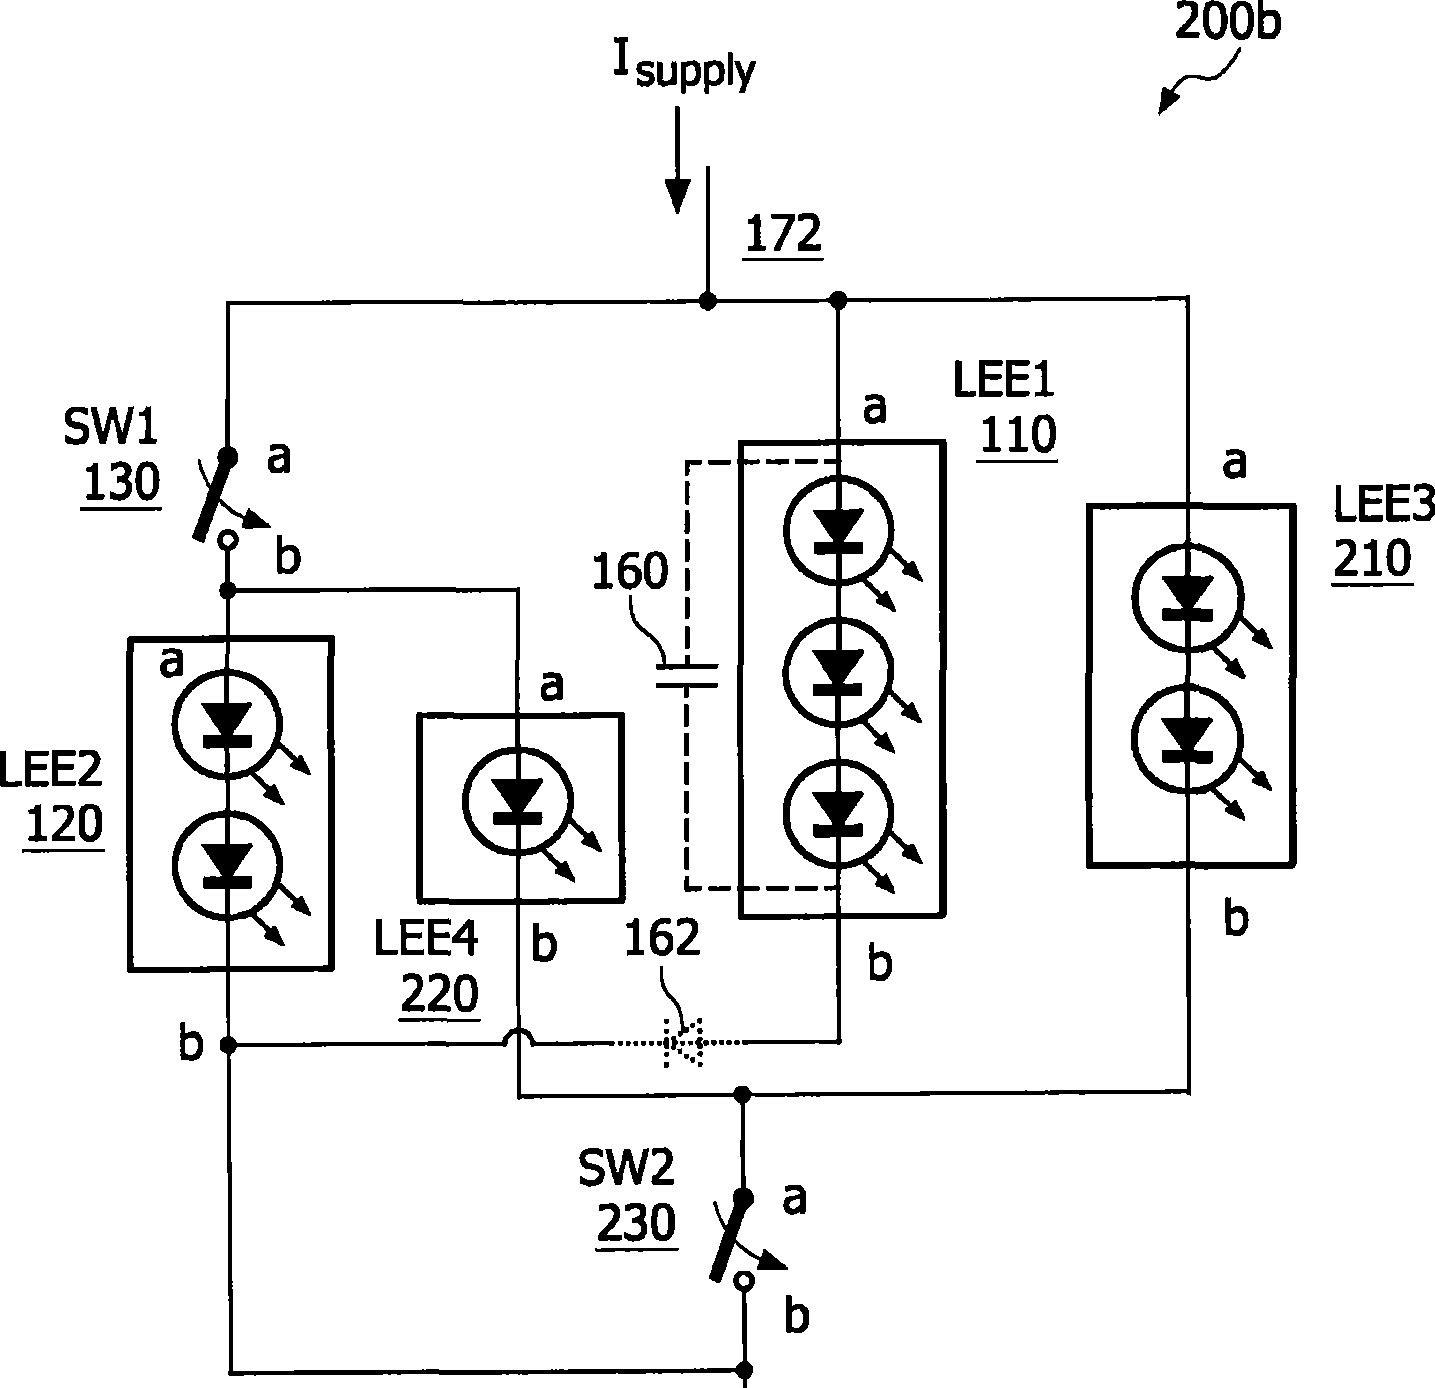 A switched light element array and method of operation